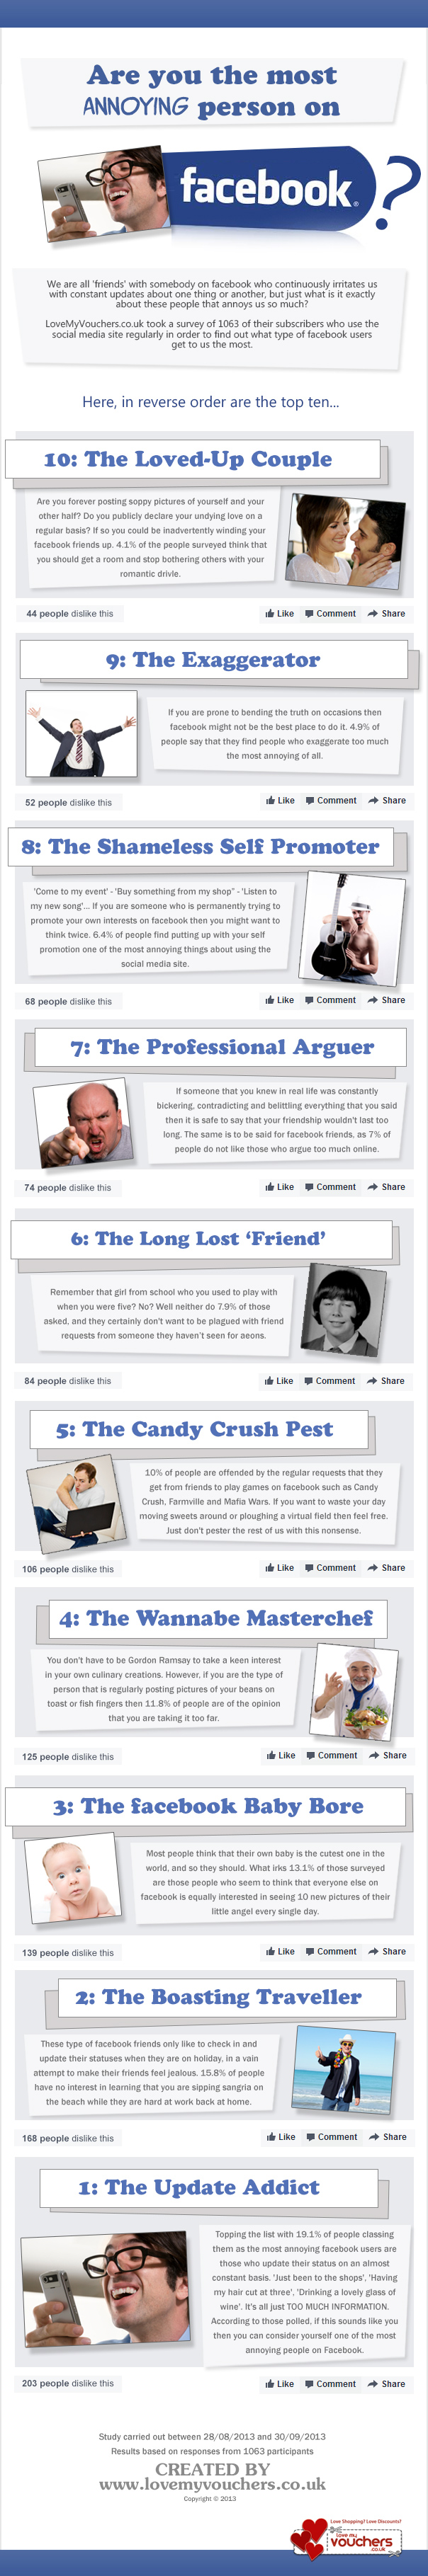 the-The-10-most-annoying-people-on-facebook